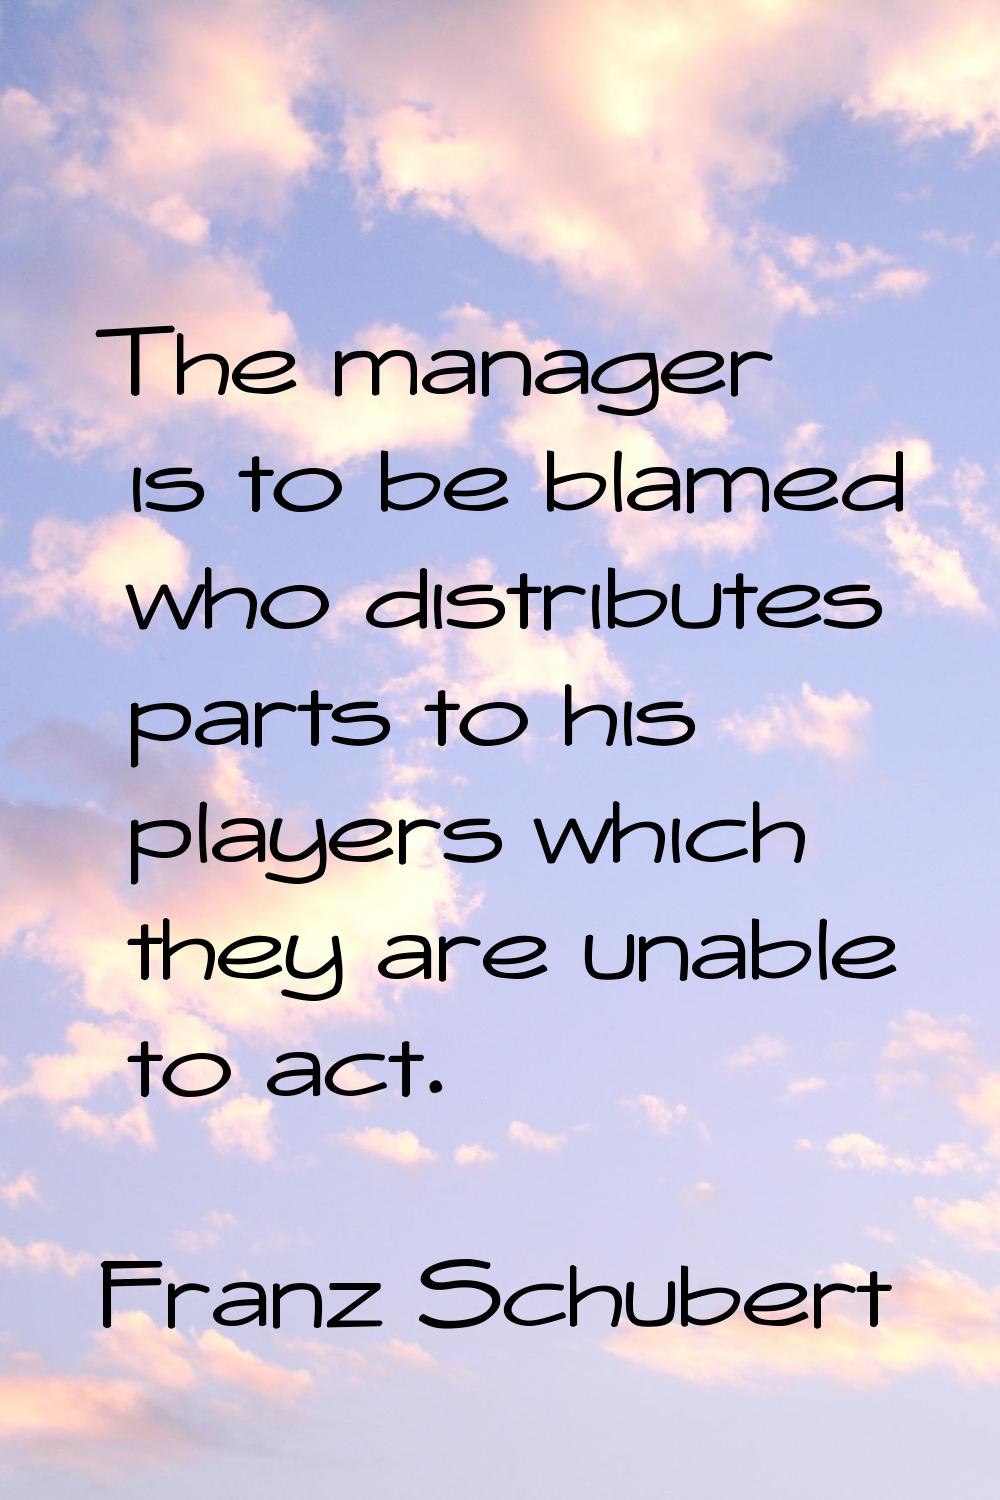 The manager is to be blamed who distributes parts to his players which they are unable to act.